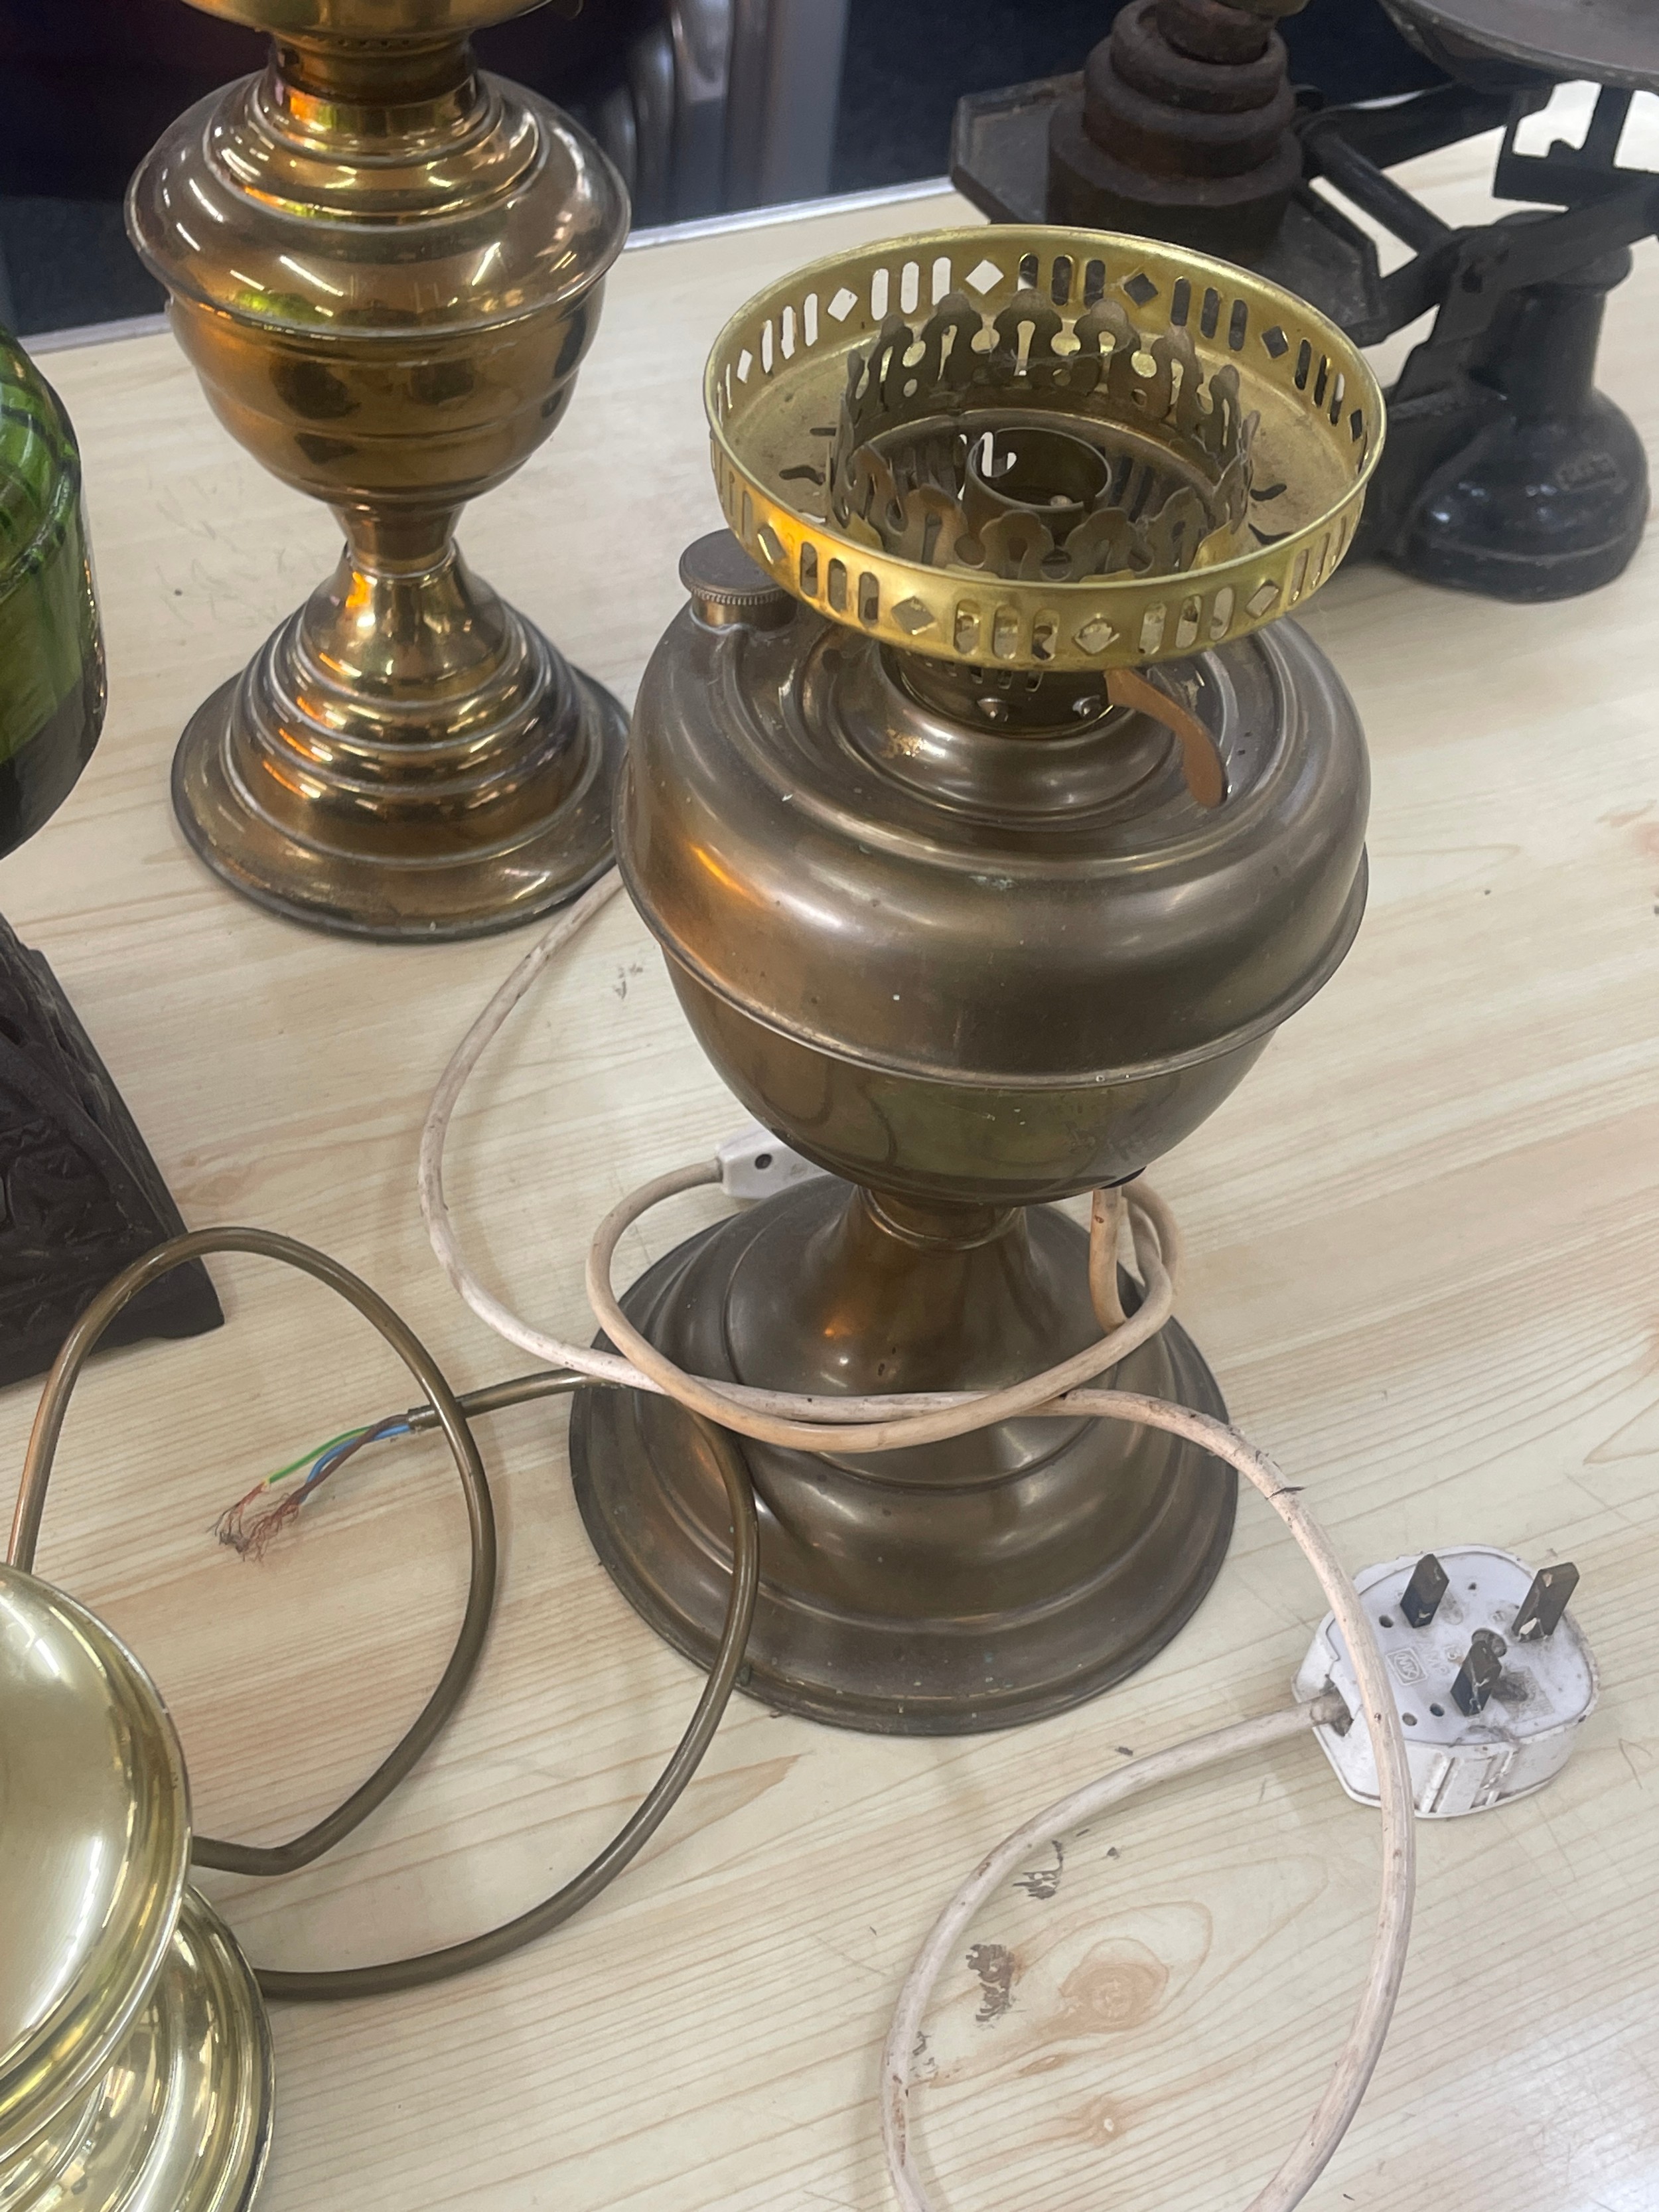 Selection of 4 vintage oil lamps, spares and repairs - Image 4 of 4